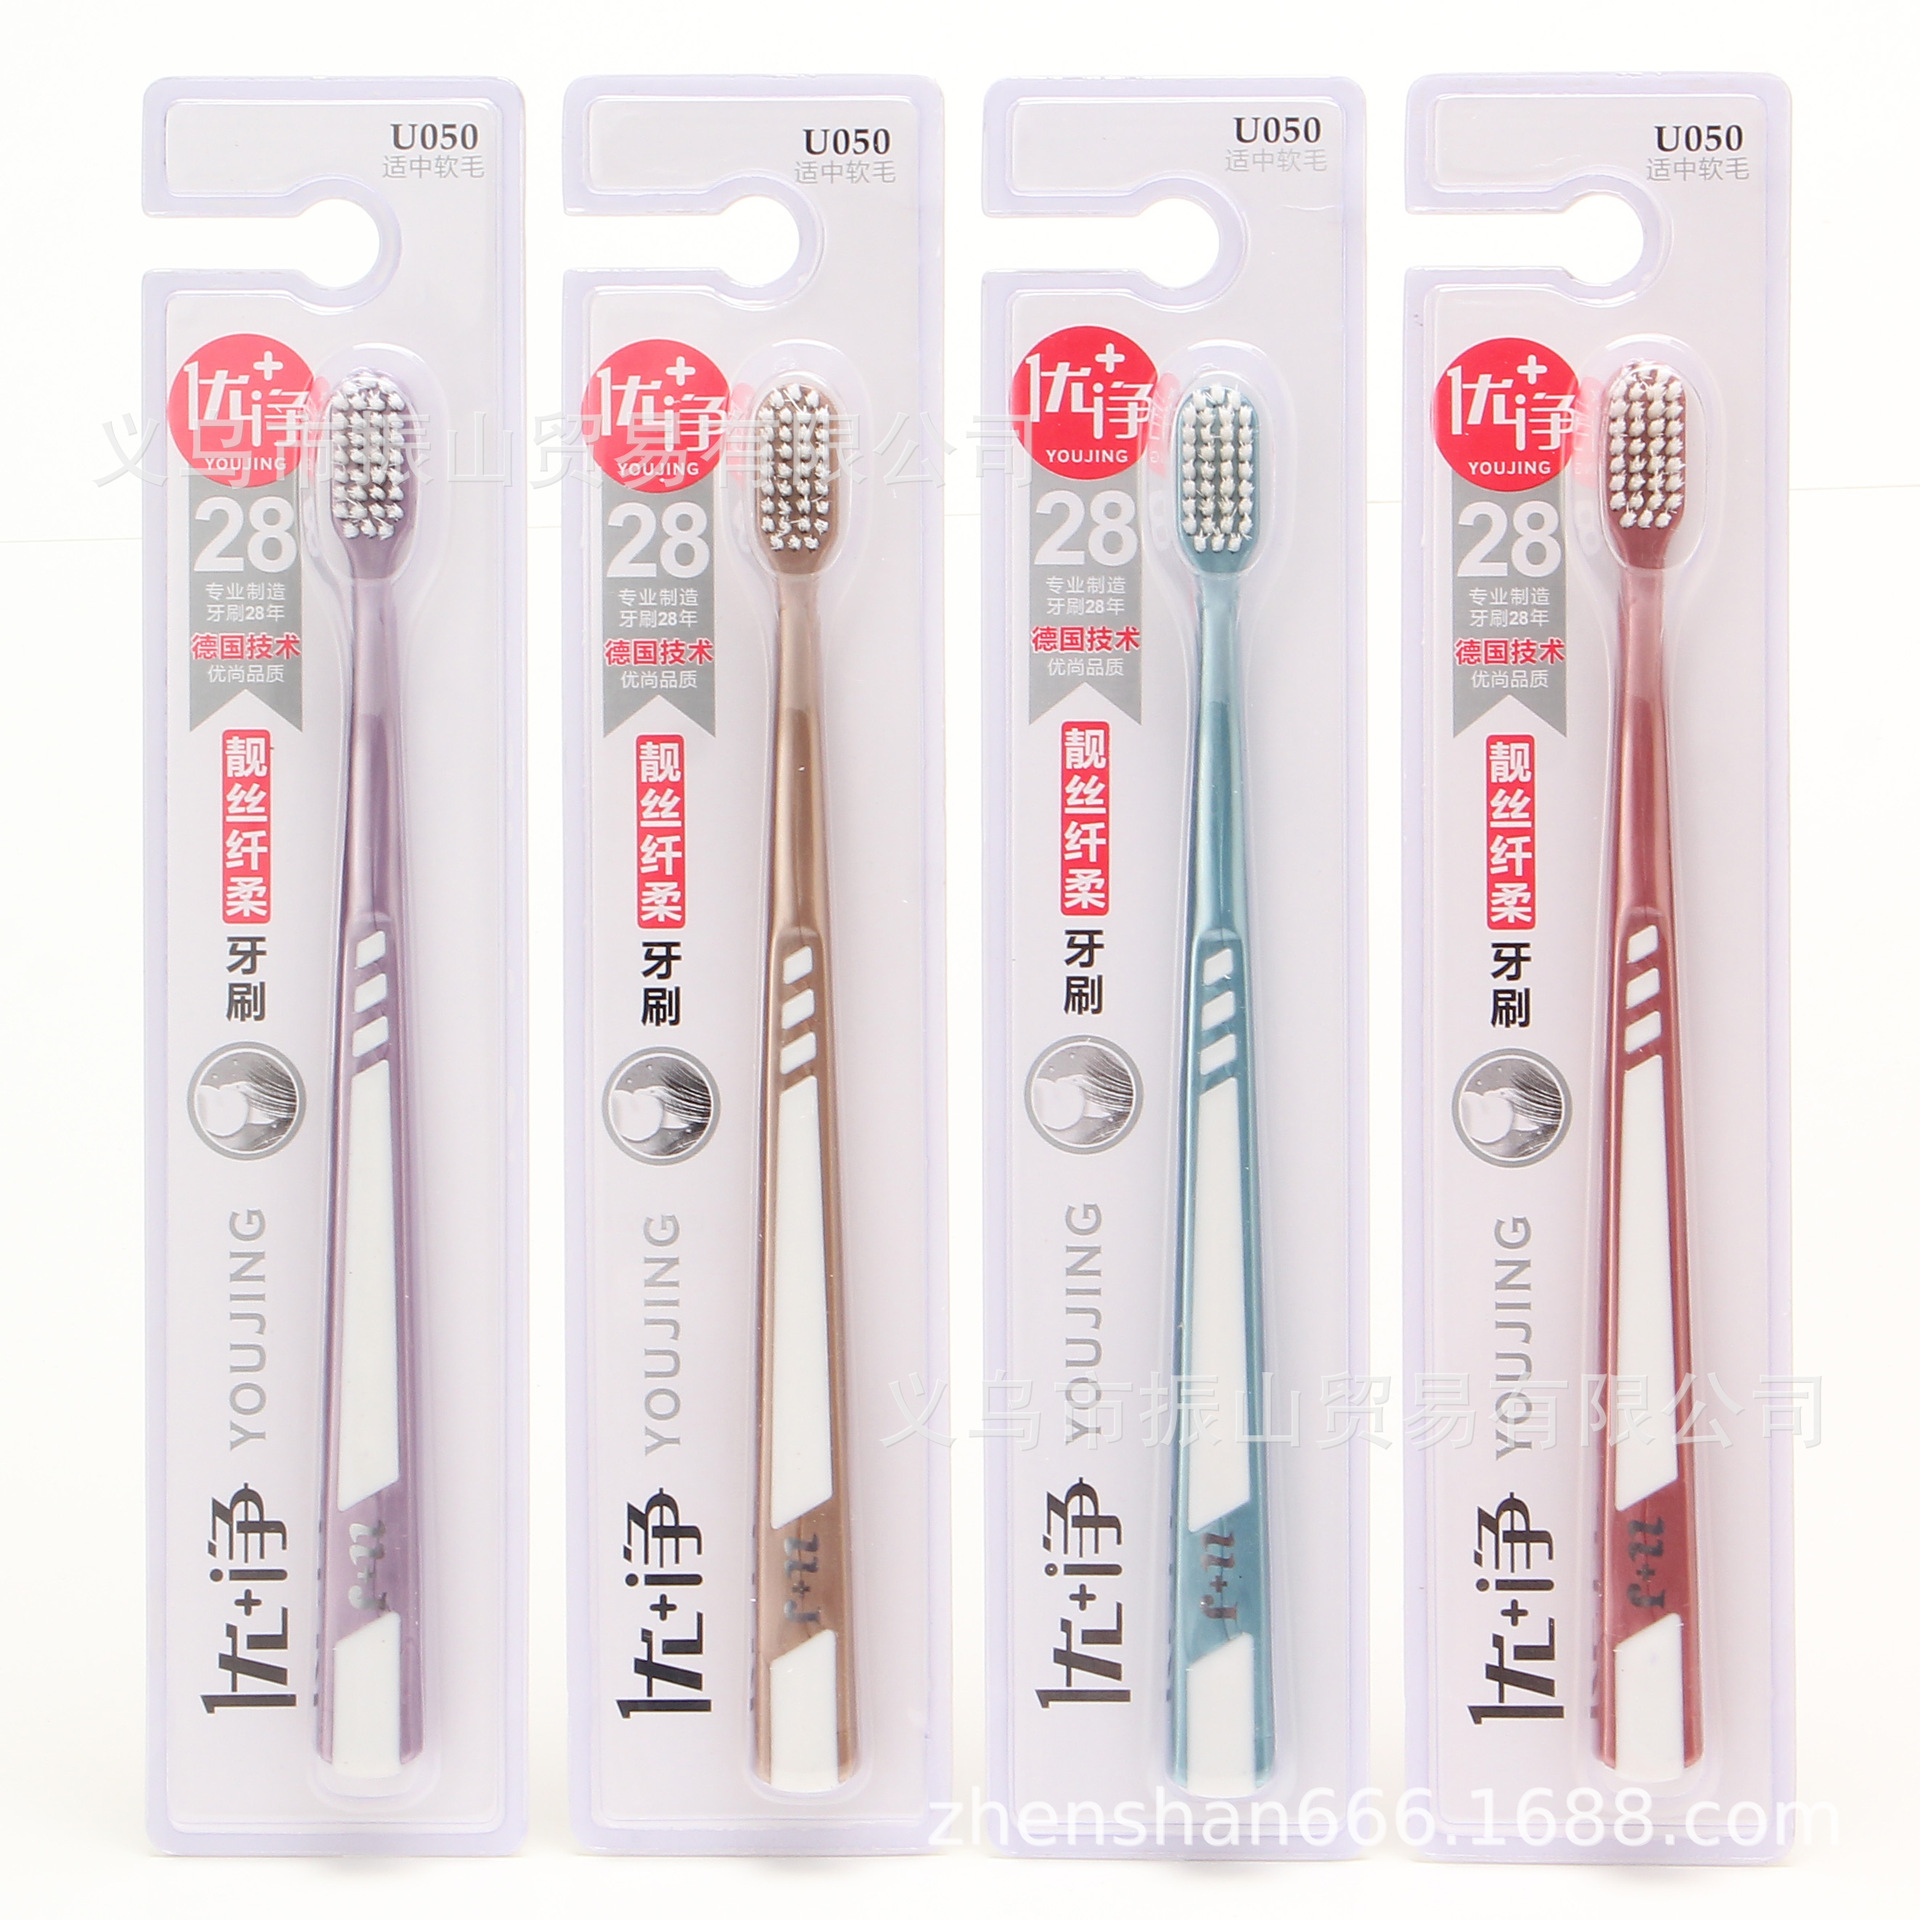 Excellent + Net 050 Guangdong Sanxiao Company Produces Beautiful Silk and Soft Soft-Bristle Toothbrush